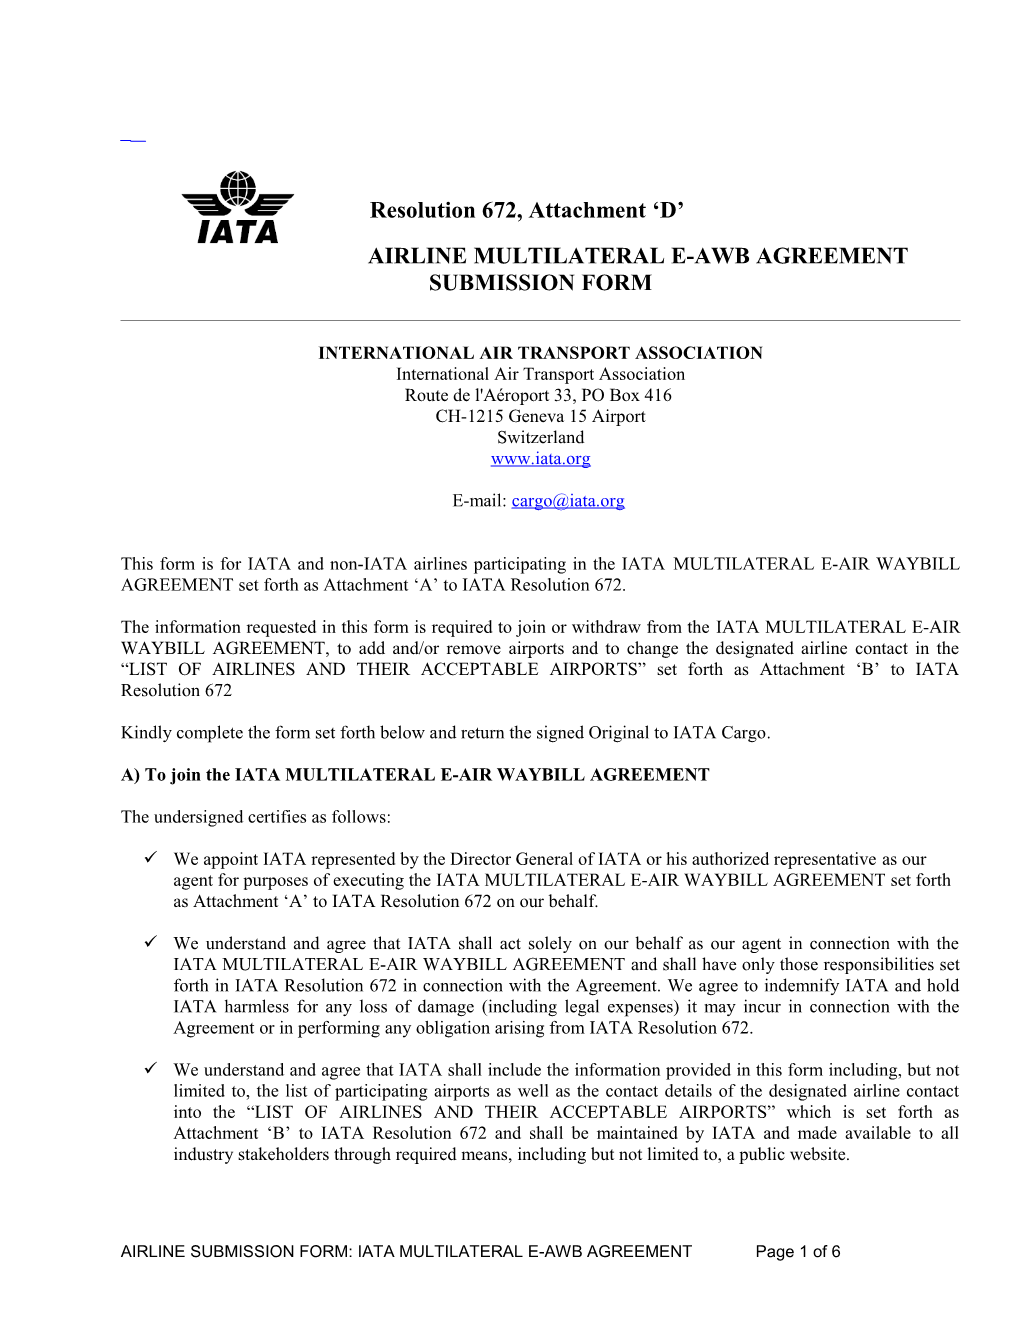 Airline Multilateral E-Awb Agreement Submission Form